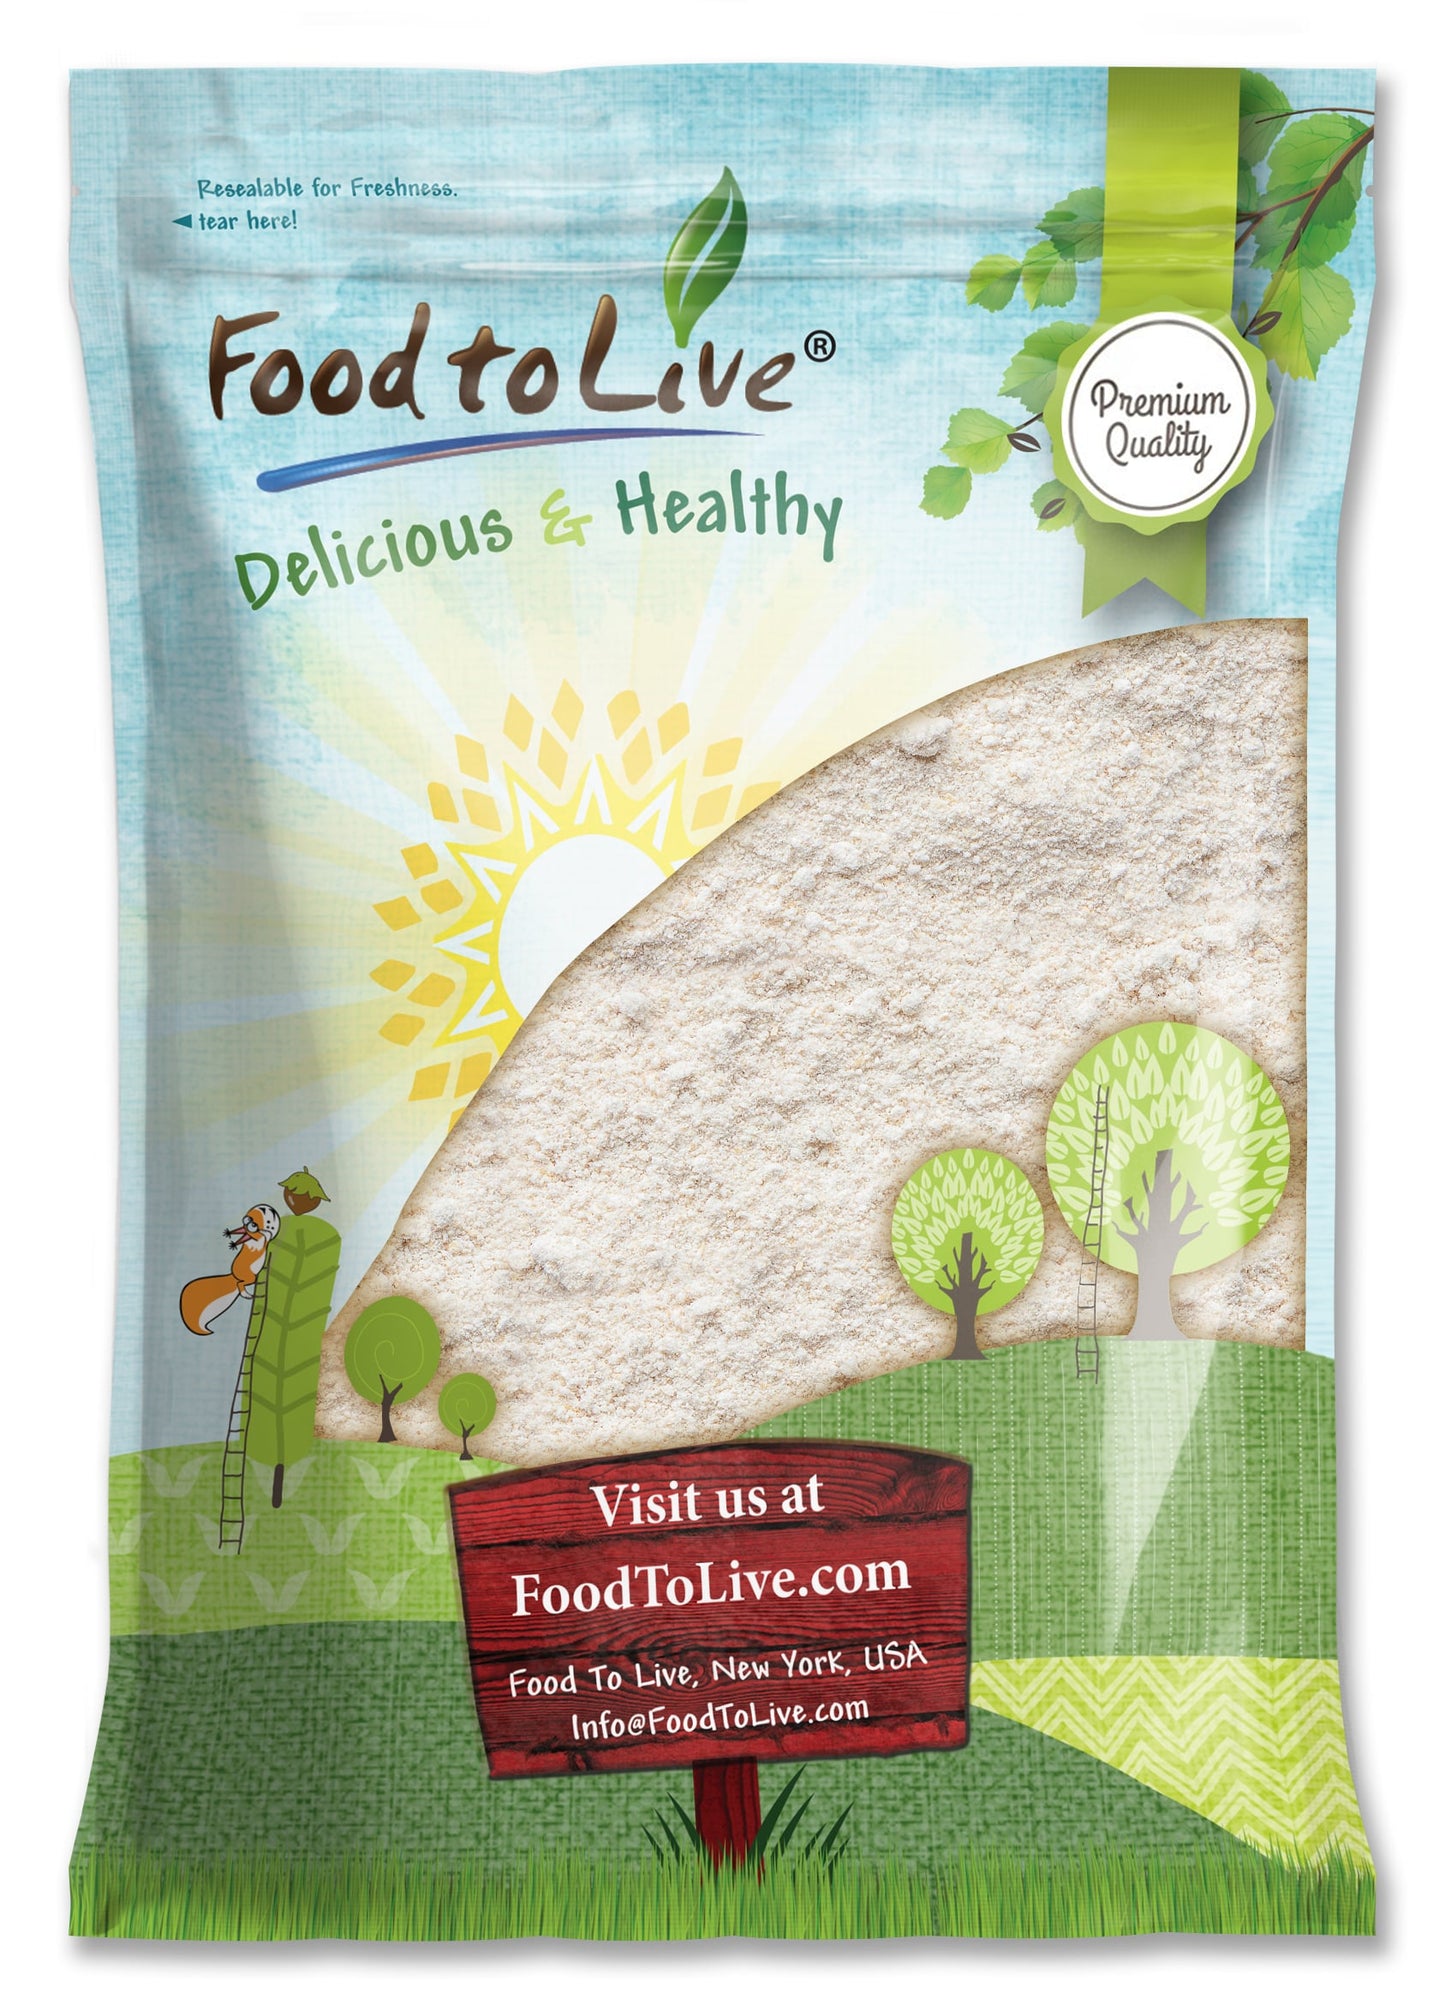 Whole Grain Oat Flour – Finely Ground from Whole Grain Oat Groats, Vegan, Bulk. Rich in Fiber, Protein. Perfect for Flour Blends. Great for Baking Muffins, Fluffy Cakes, Bread, and Pancakes